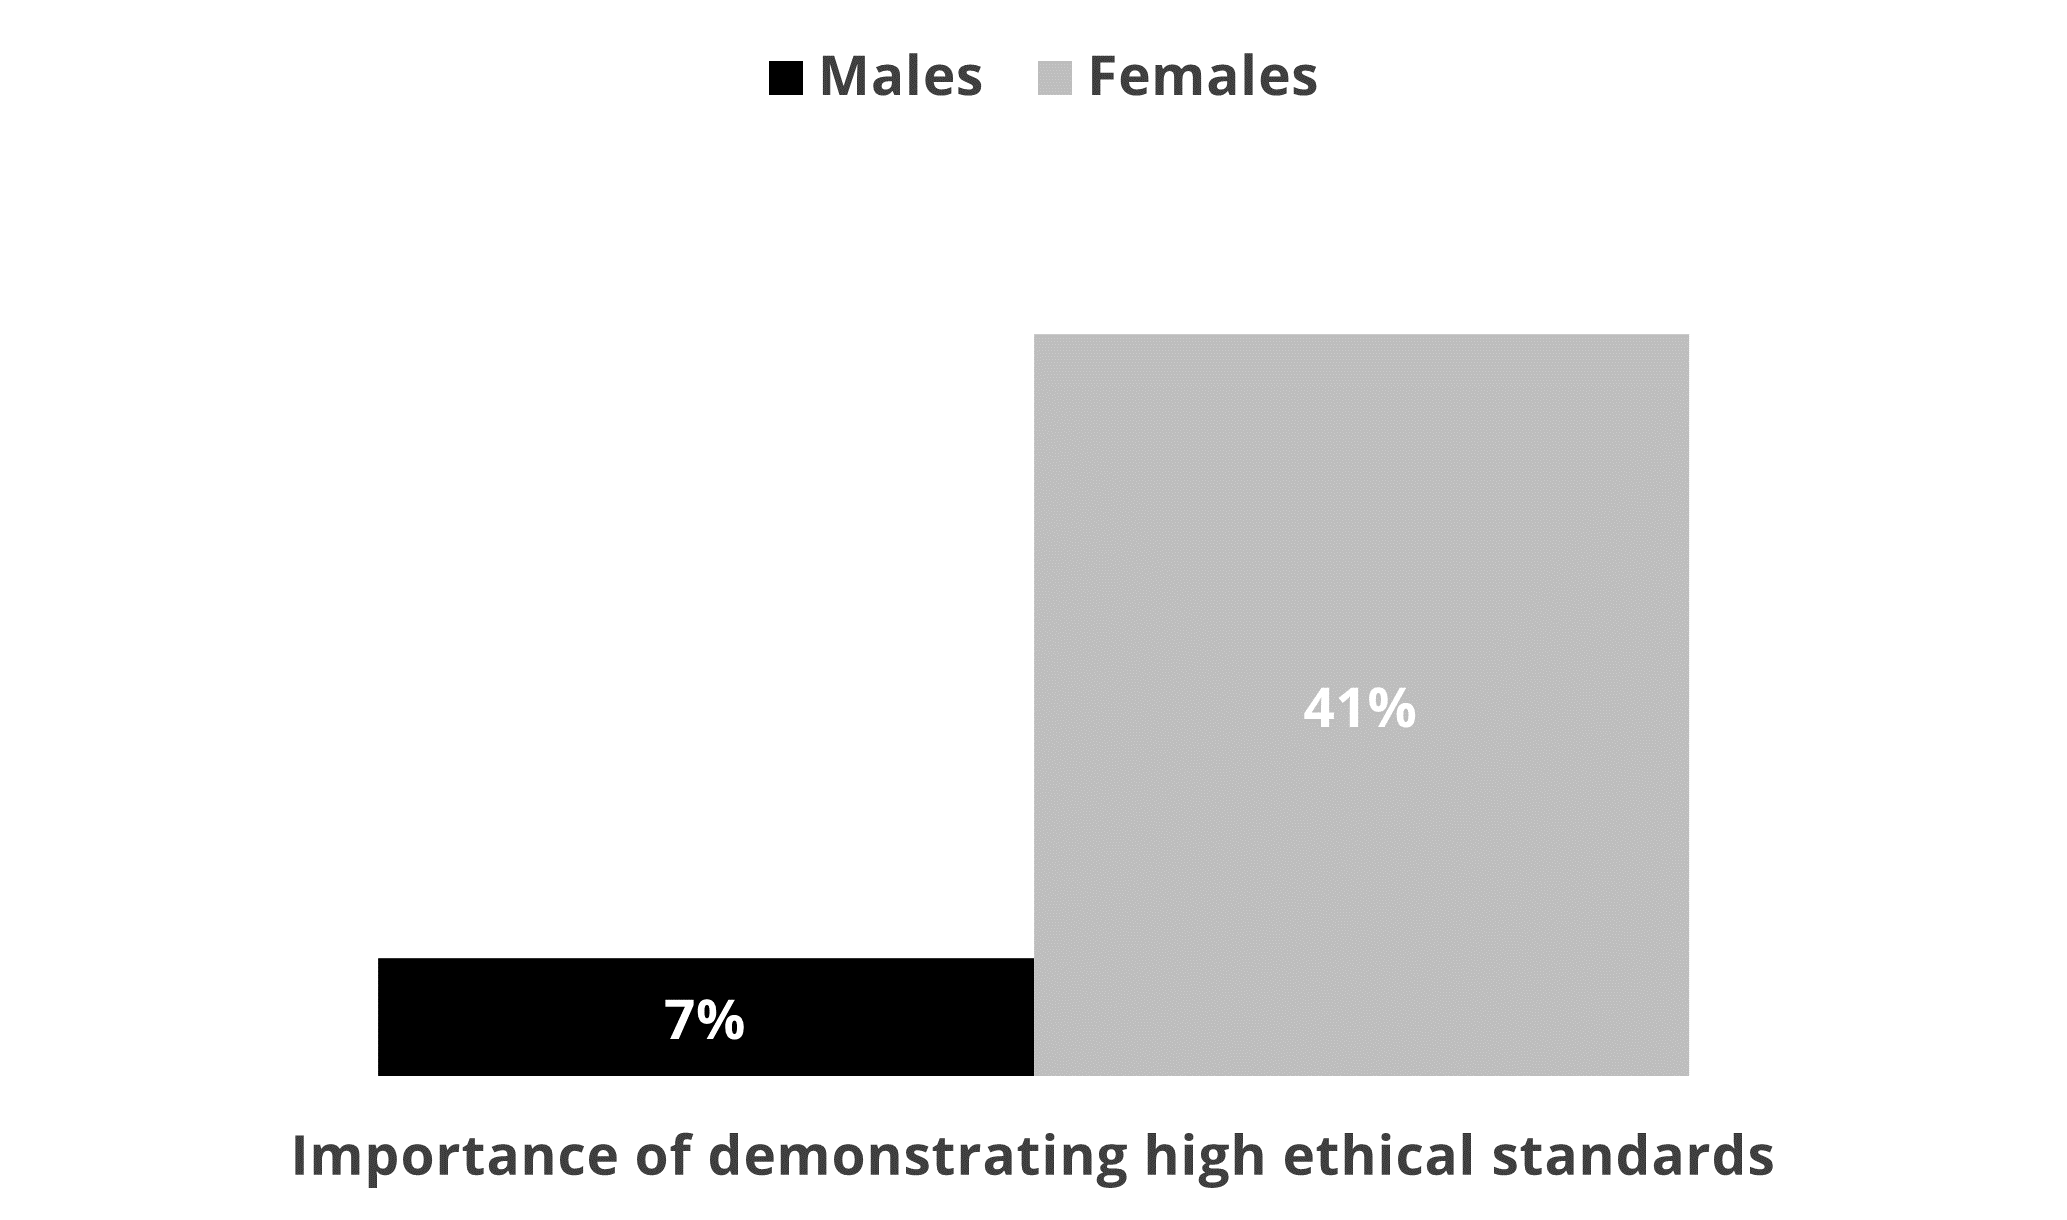 Figure 2: Importance of federal government leadership demonstrating high ethical standards, by gender